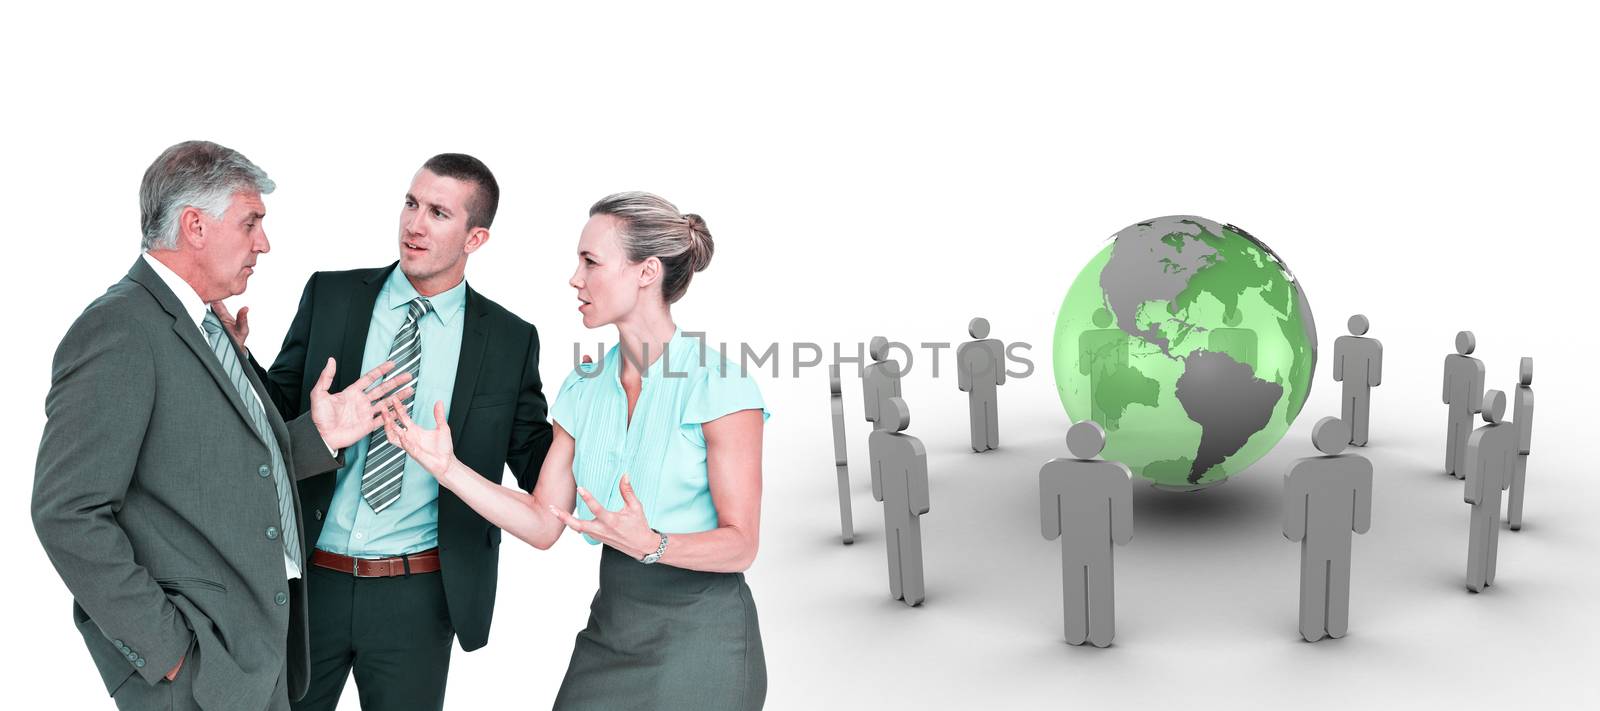 Composite image of business people having a disagreement by Wavebreakmedia